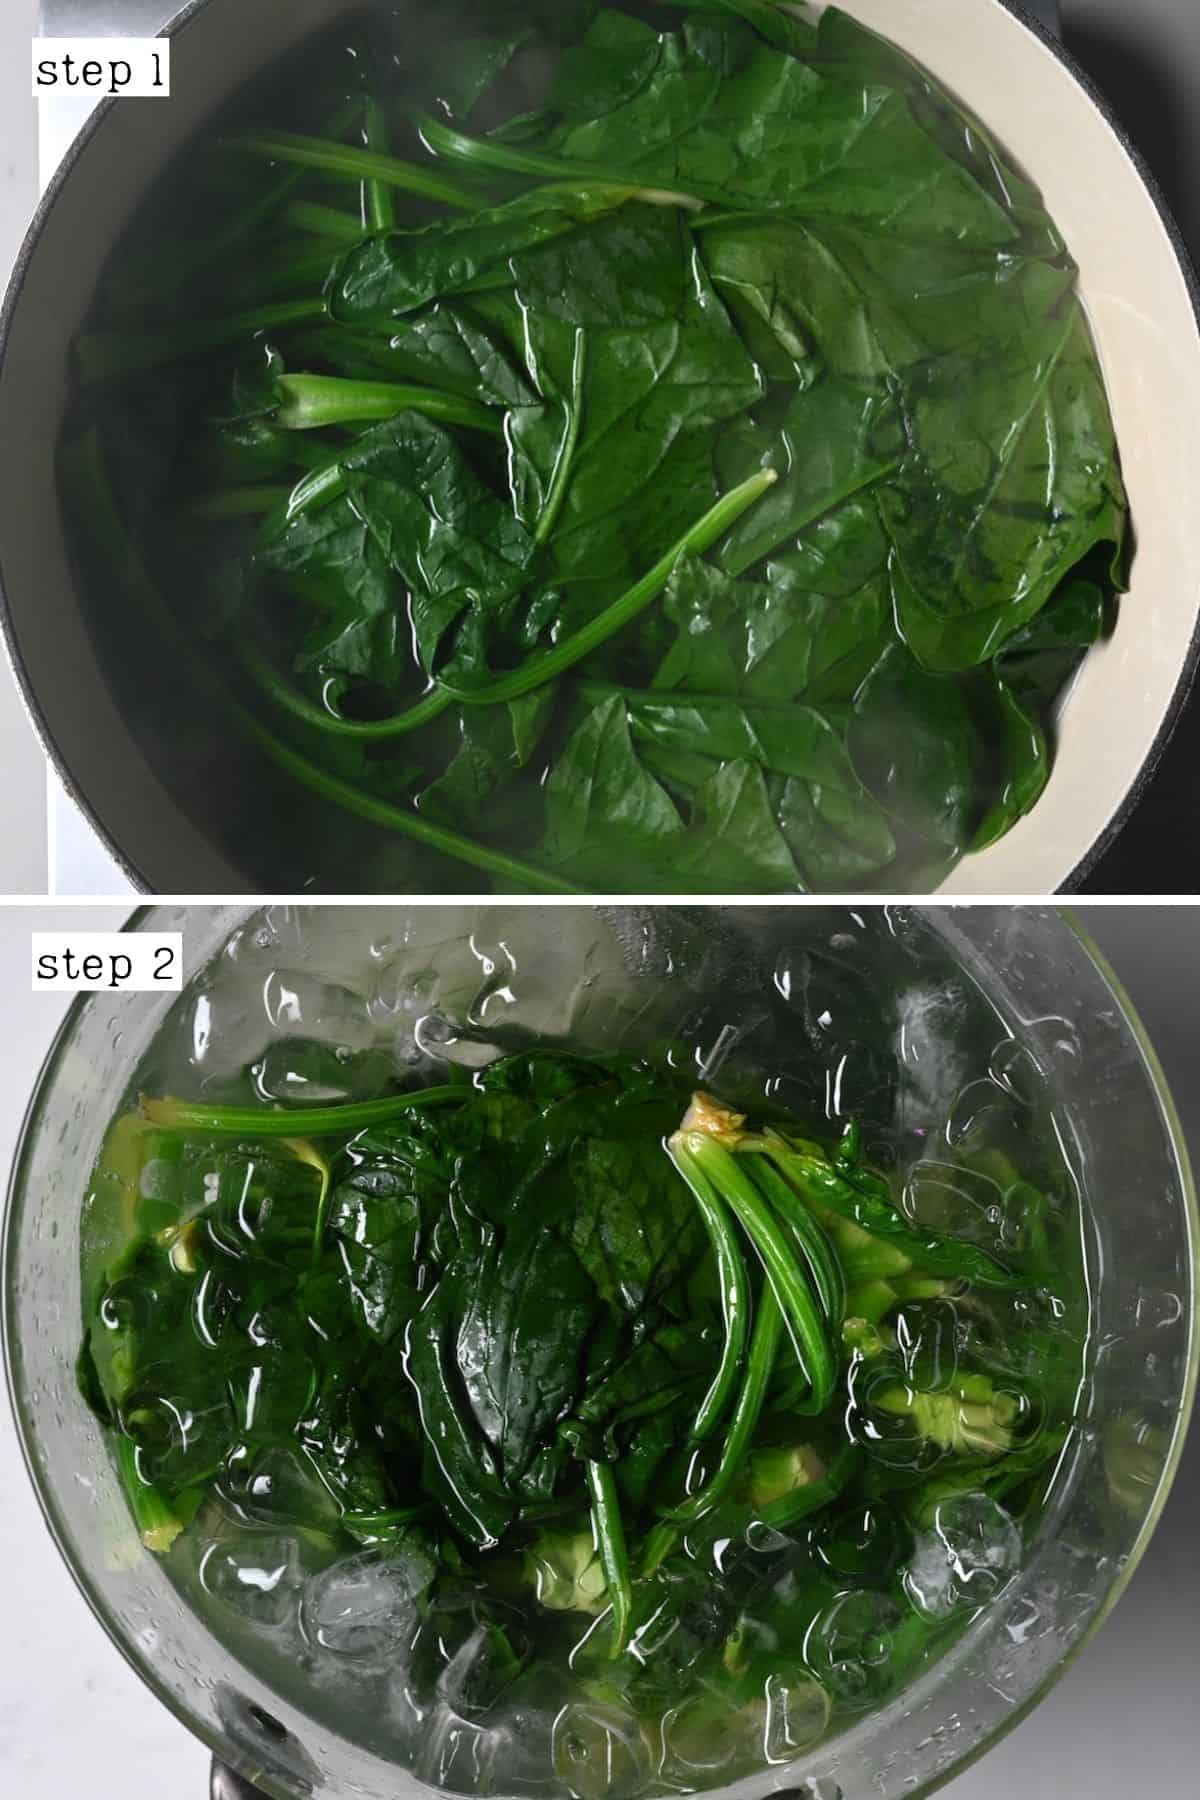 Steps for blanching spinach